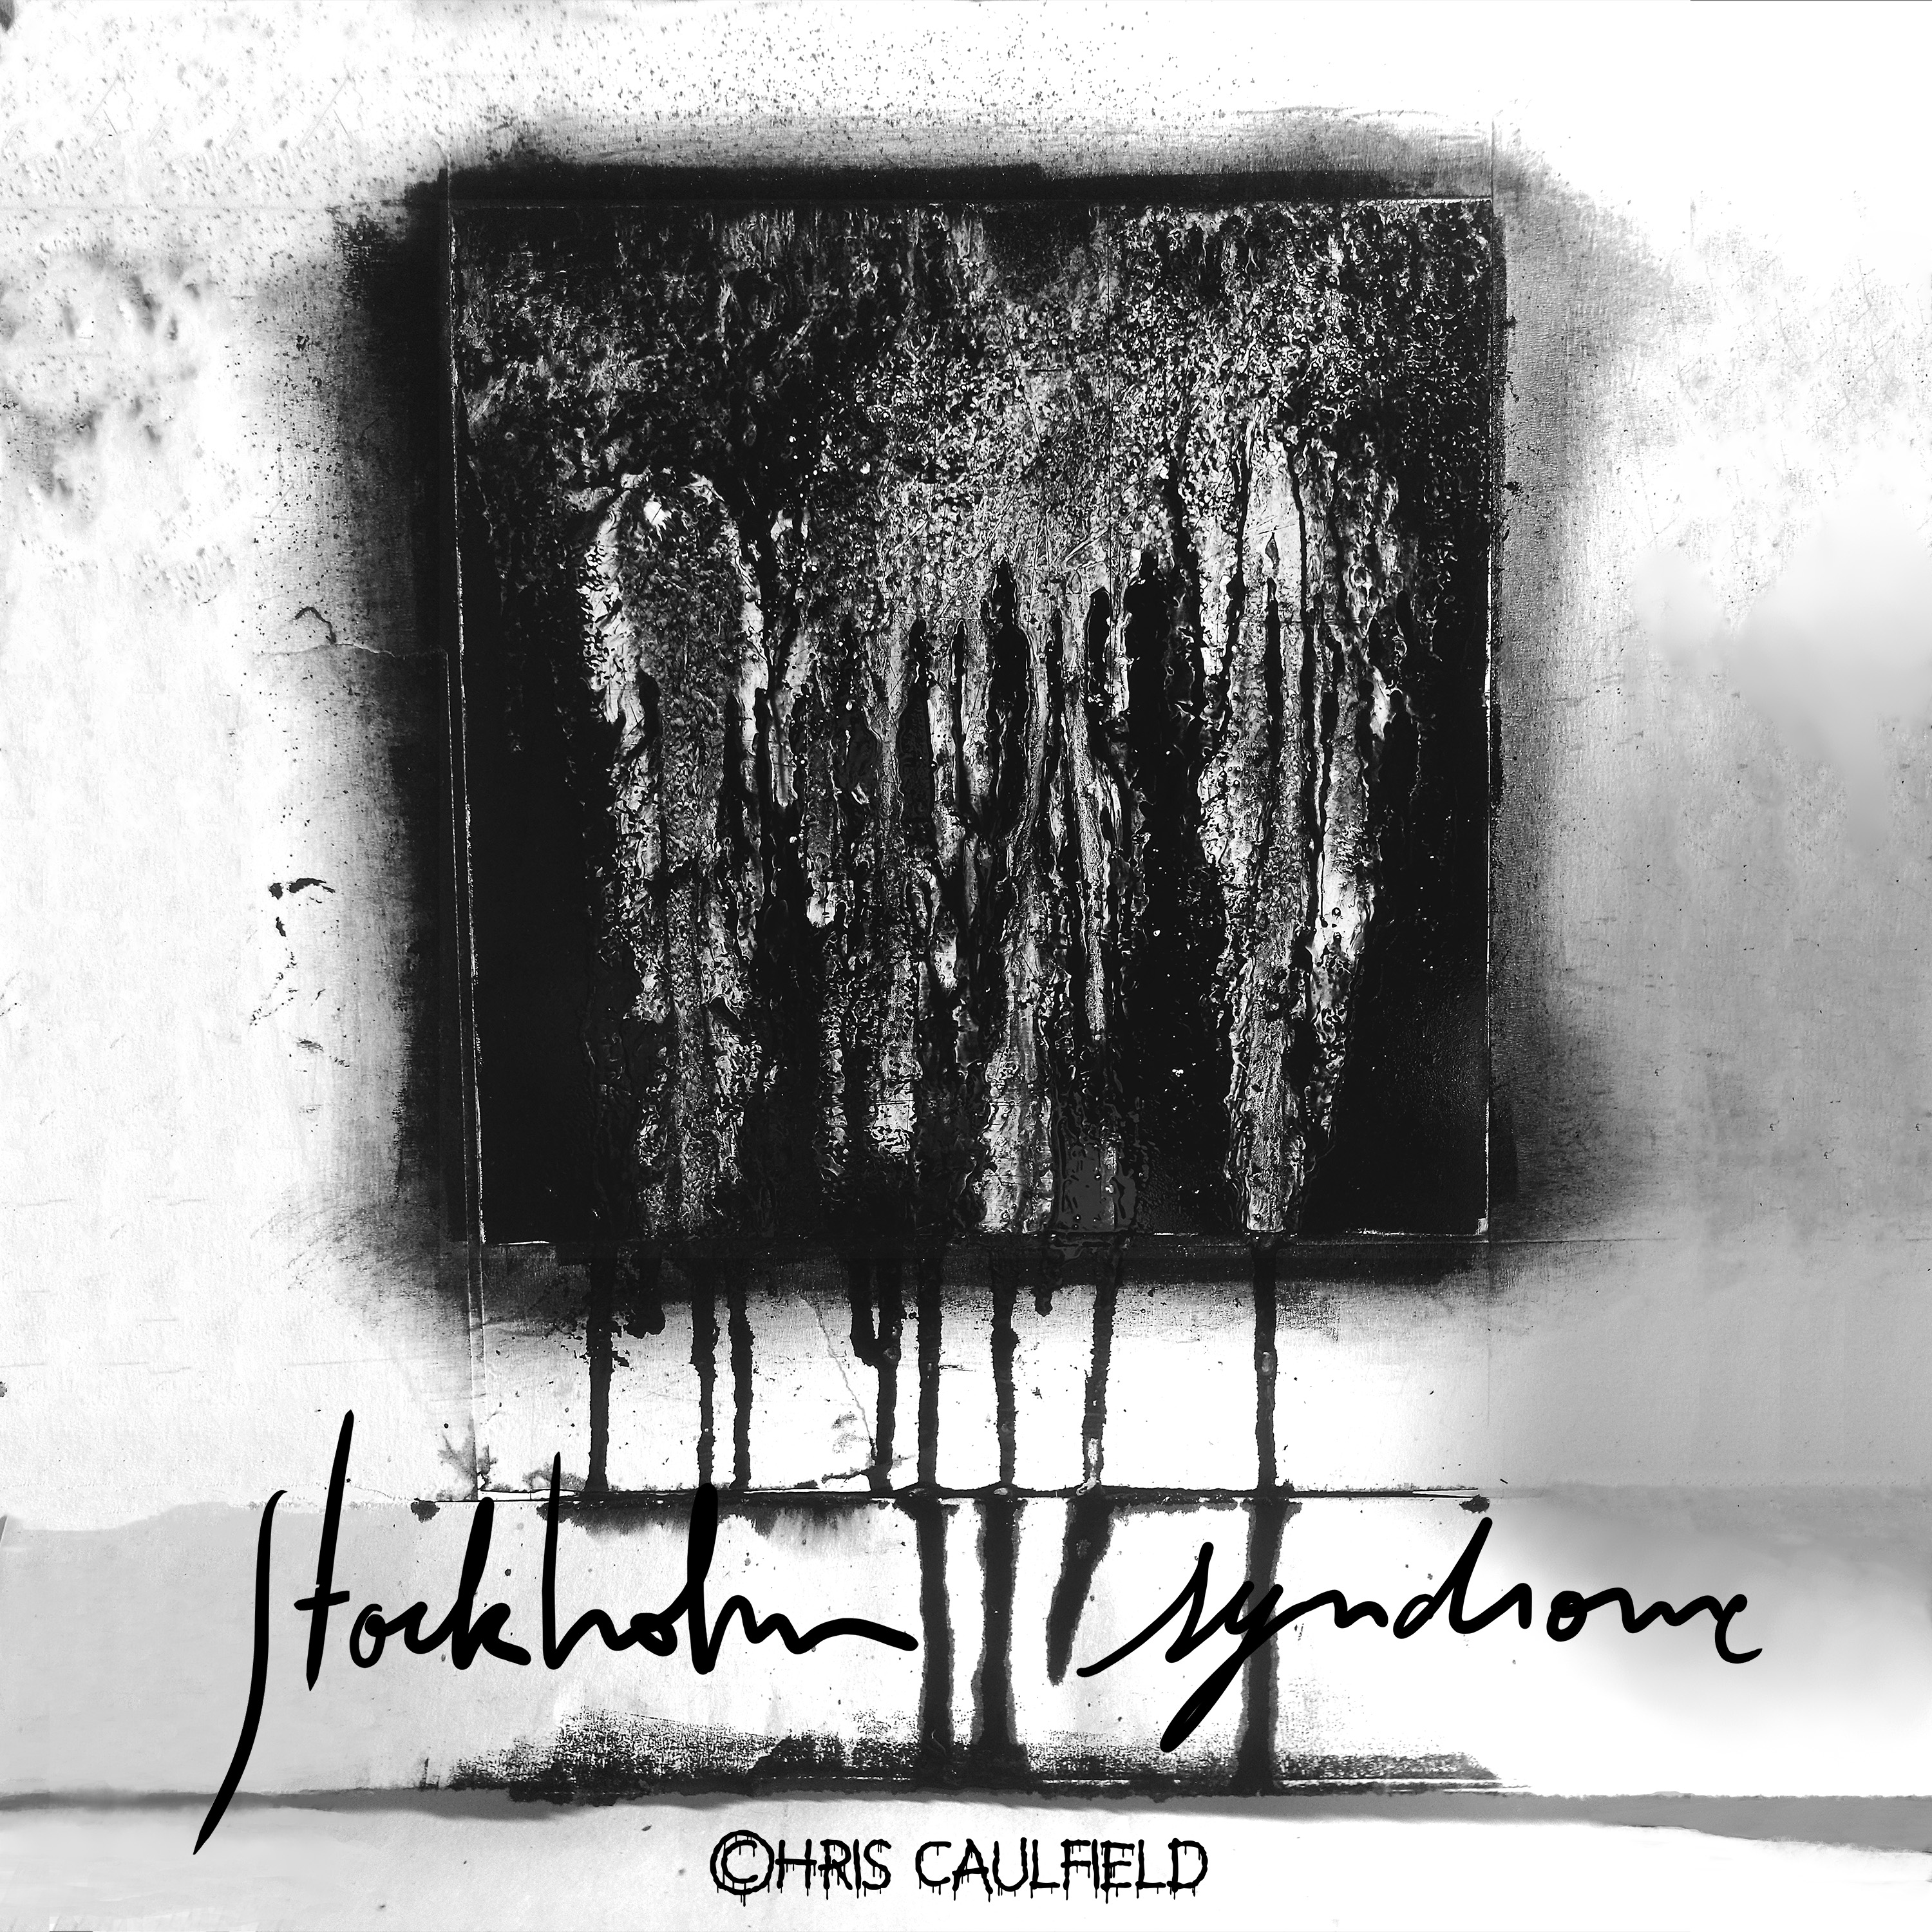 Weaving Introspective Lyricism with Haunting Melodies: Canadian Artist Chris Caufield Delivers Another Hit Single